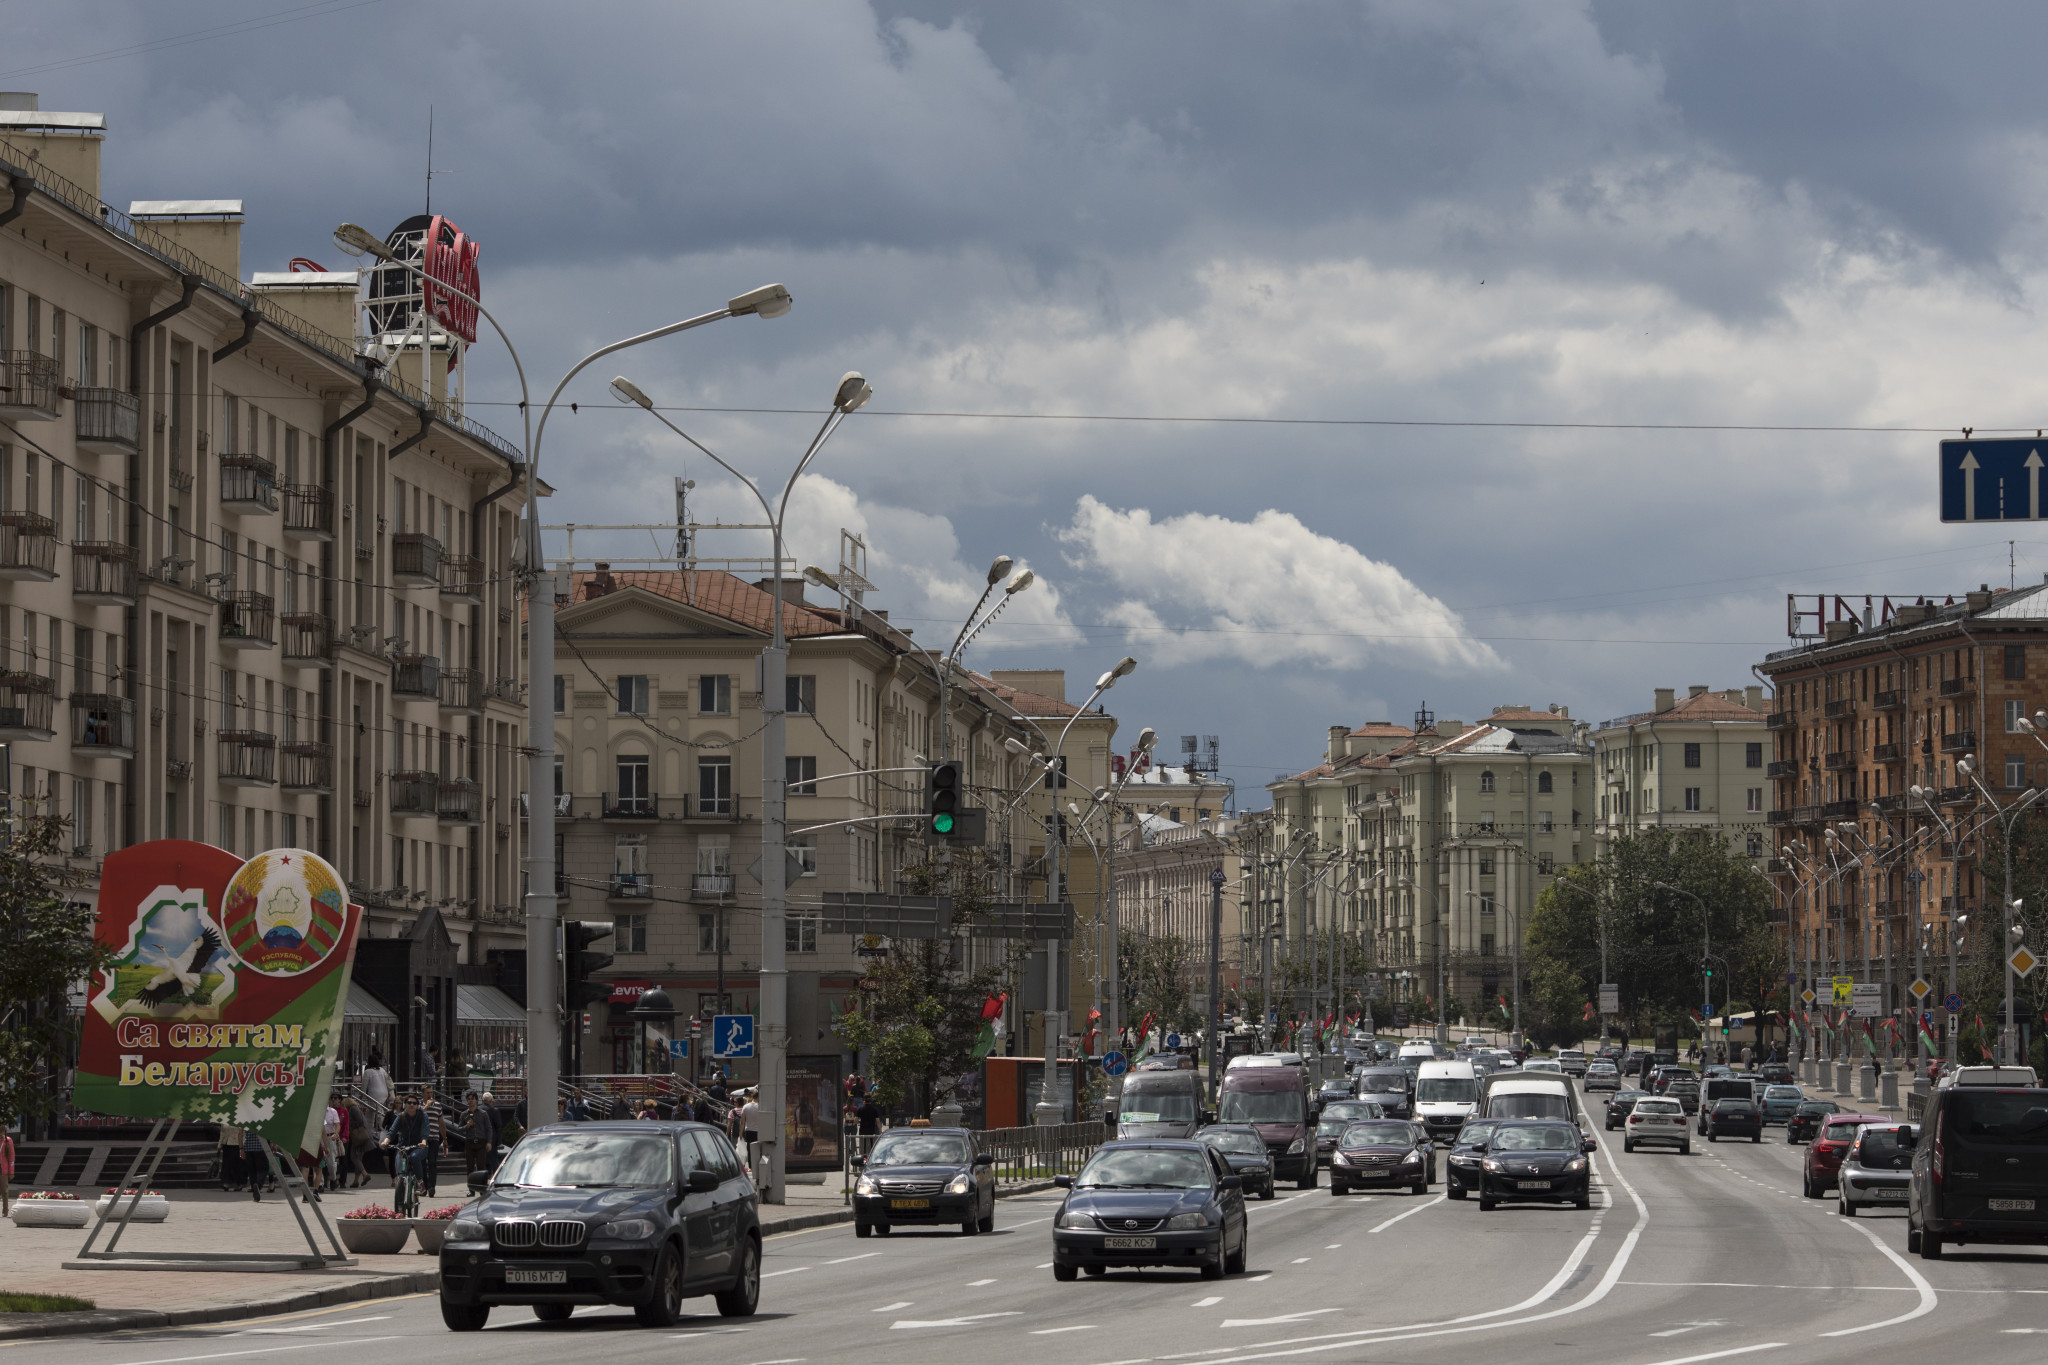 LED lighting is to be installed on Independence Avenue in Minsk ahead of the 2019 European Games ©Getty Images